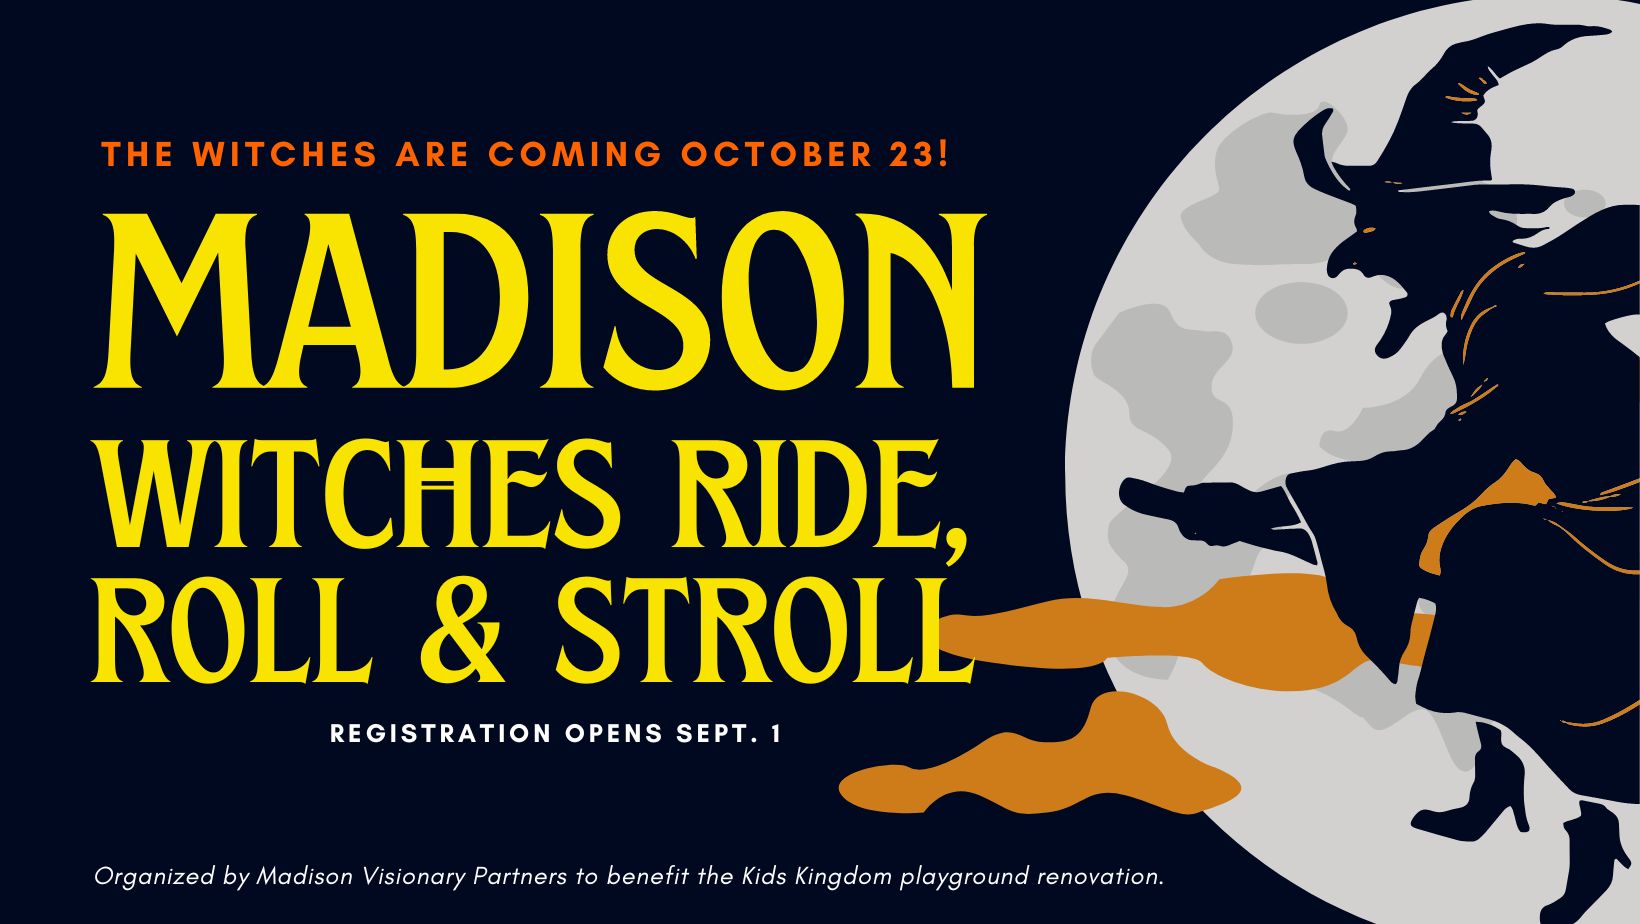 Madison AL witches ride roll & stroll October 23